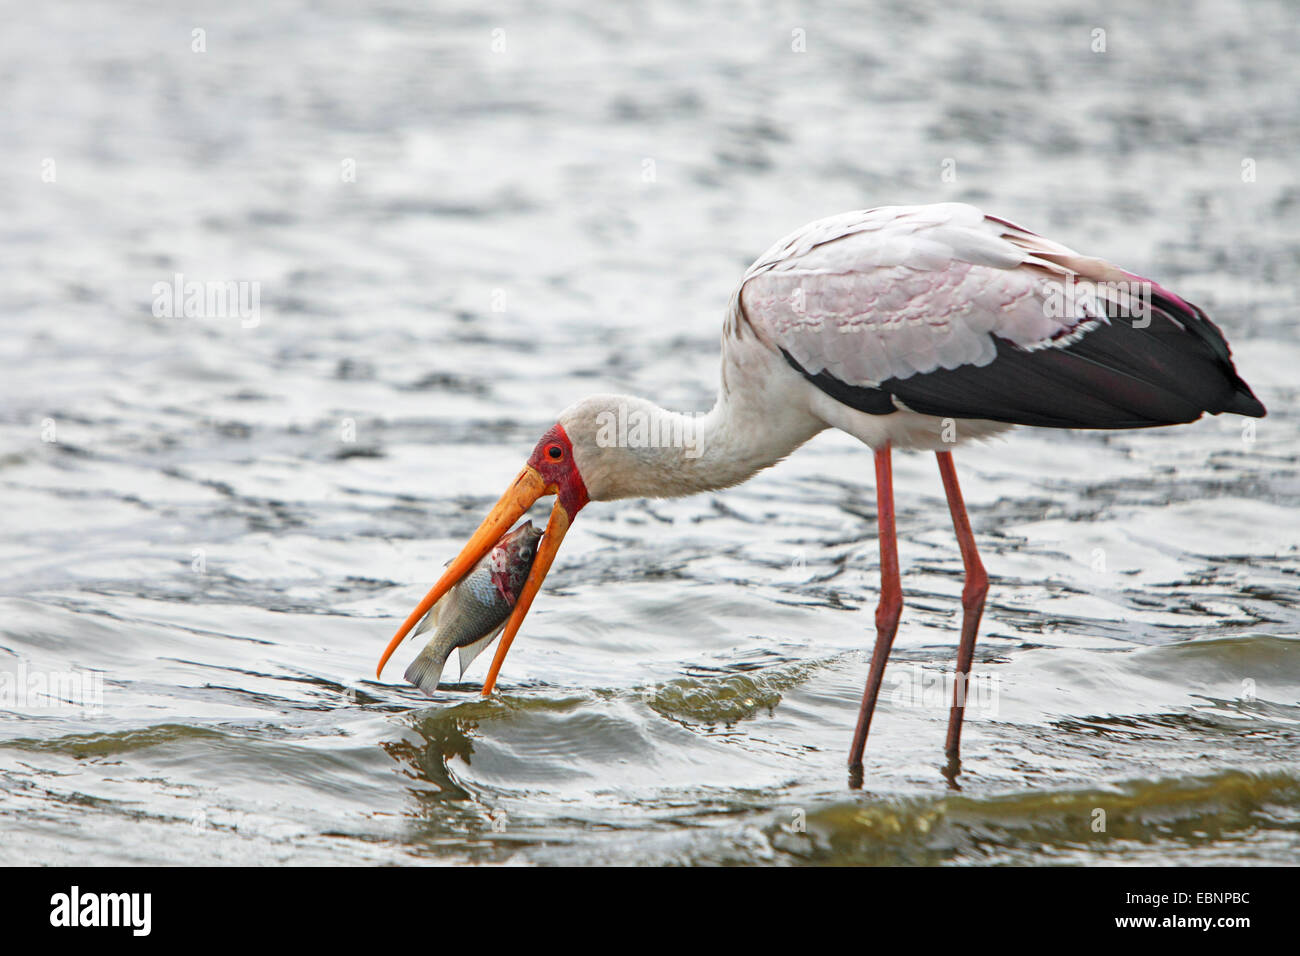 yellow-billed stork (Mycteria ibis), standing in shallow water and eating a fish, South Africa, Kruger National Park Stock Photo